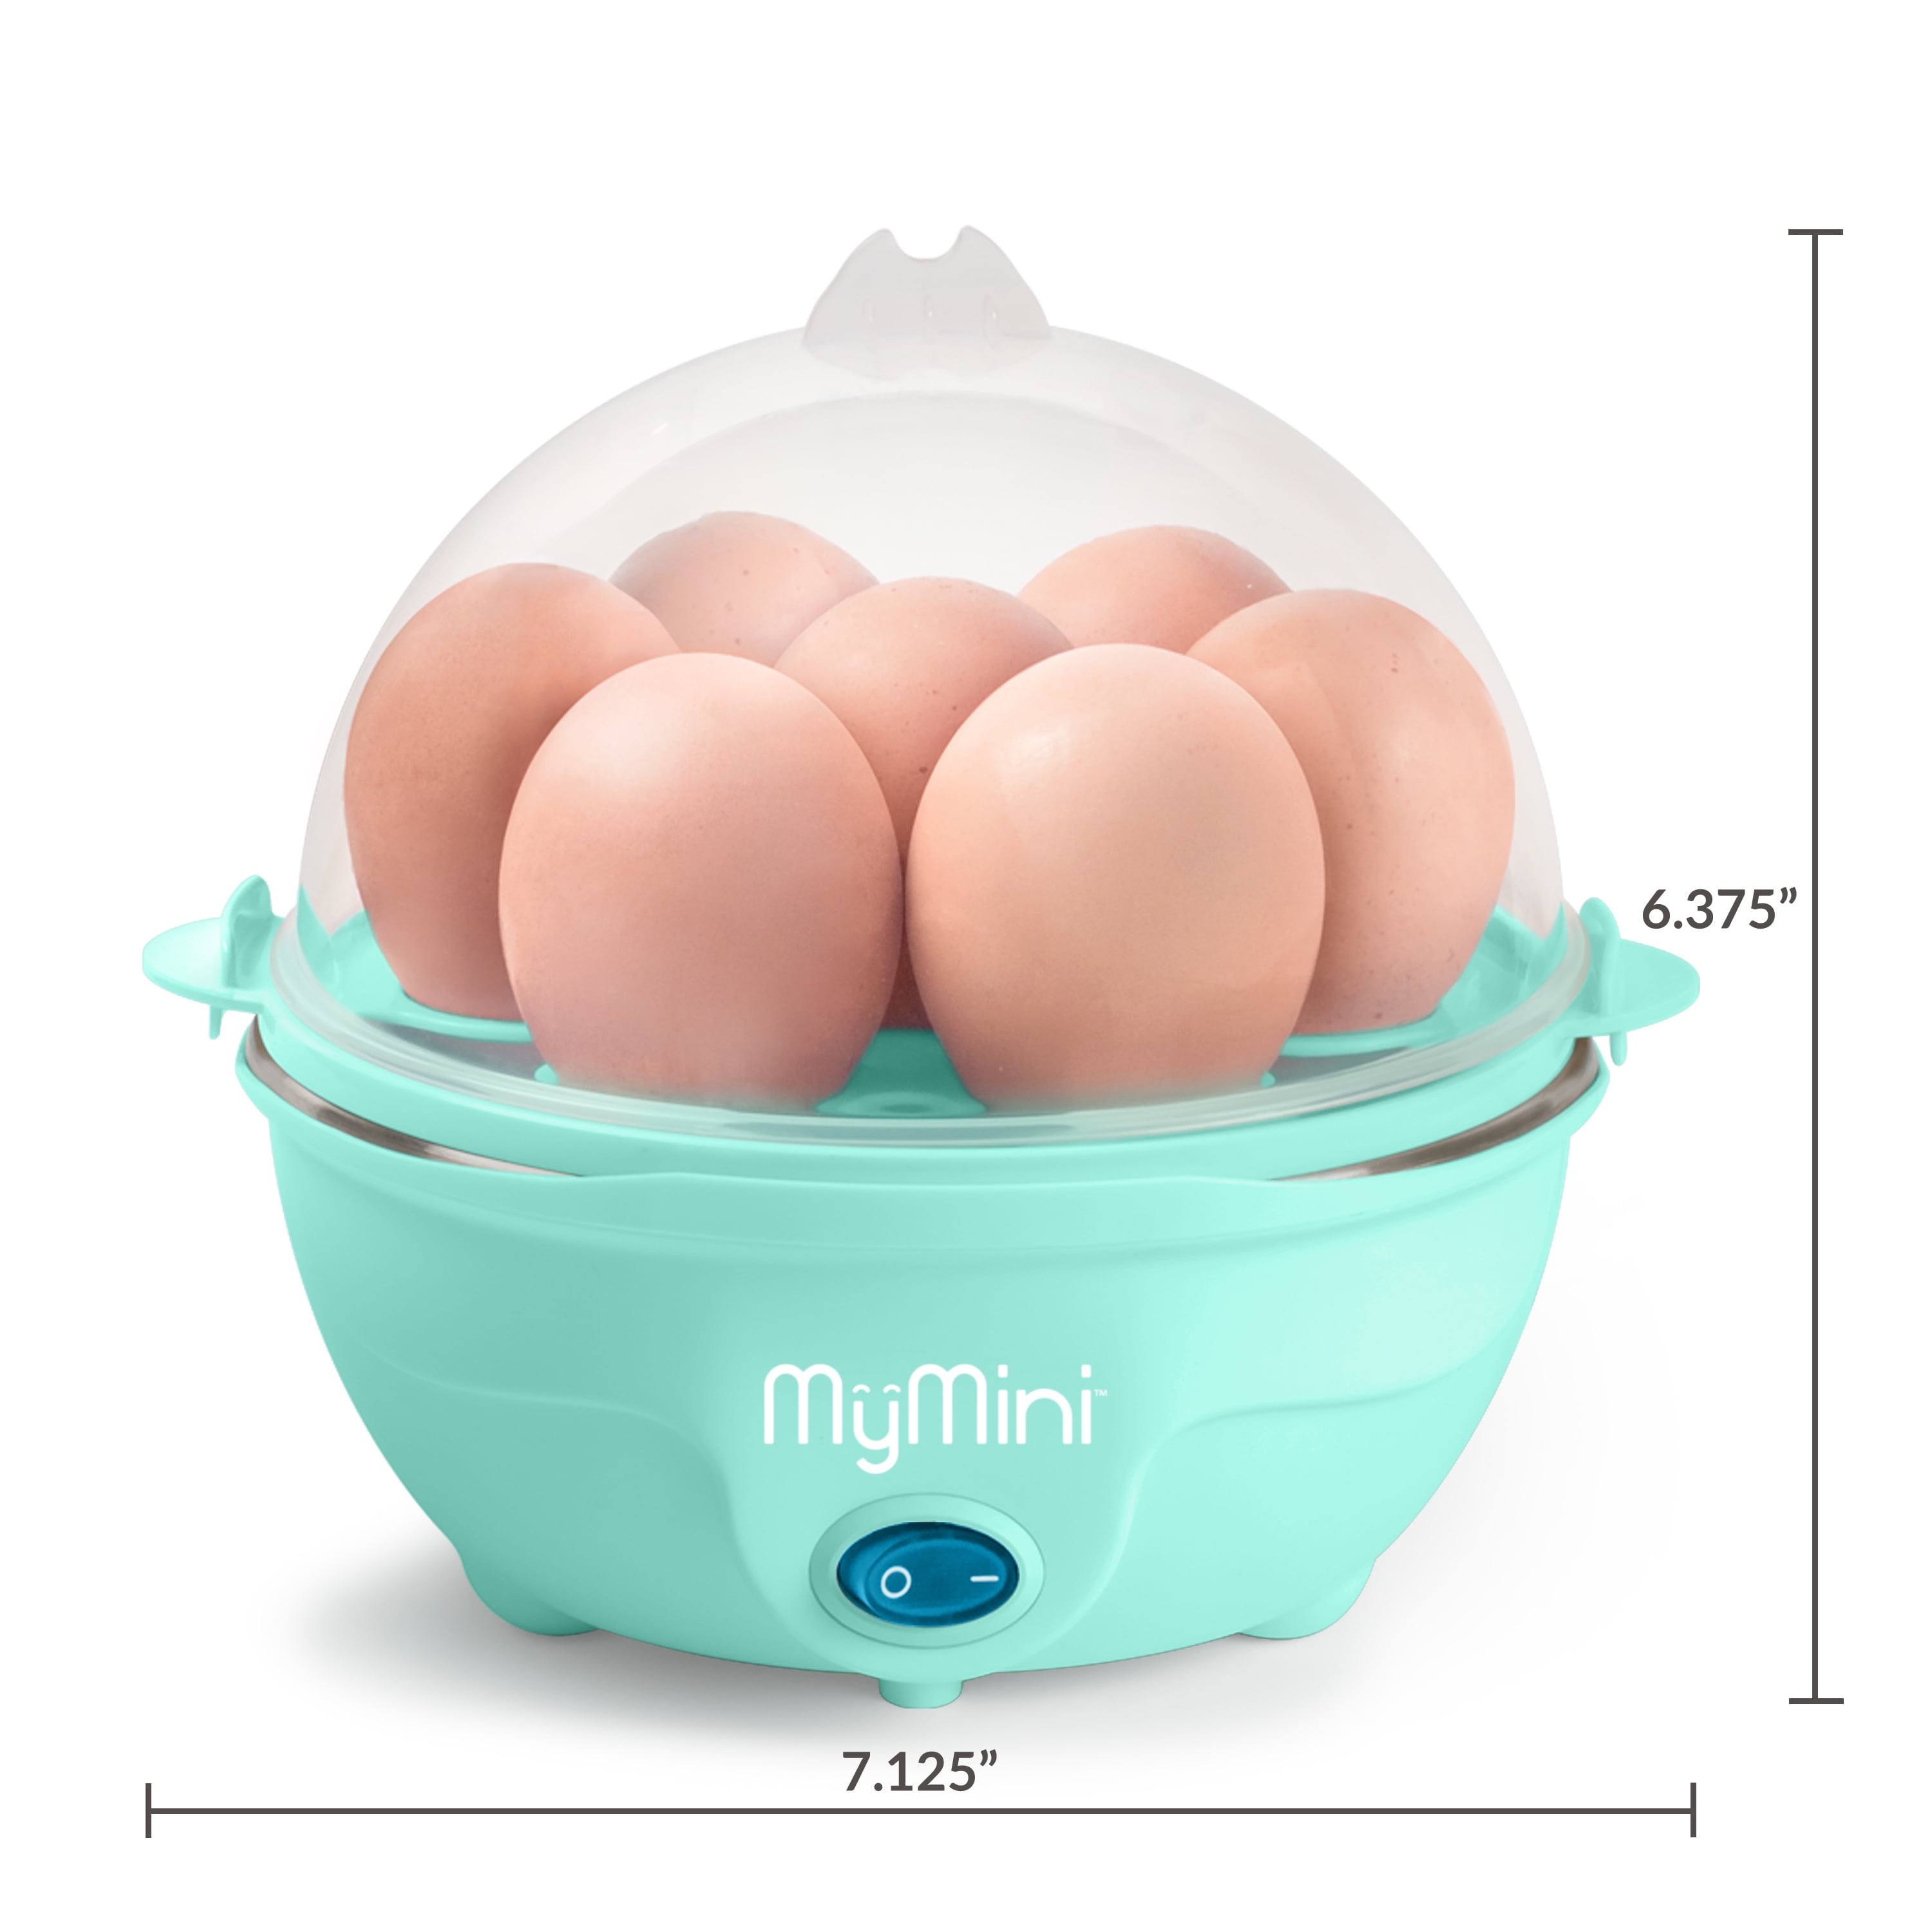 Free Shipping Special] German steamed egg cooker with automatic power-off  for household small dormitory boiled eggs artifact - Shop oidire-cn Pots &  Pans - Pinkoi